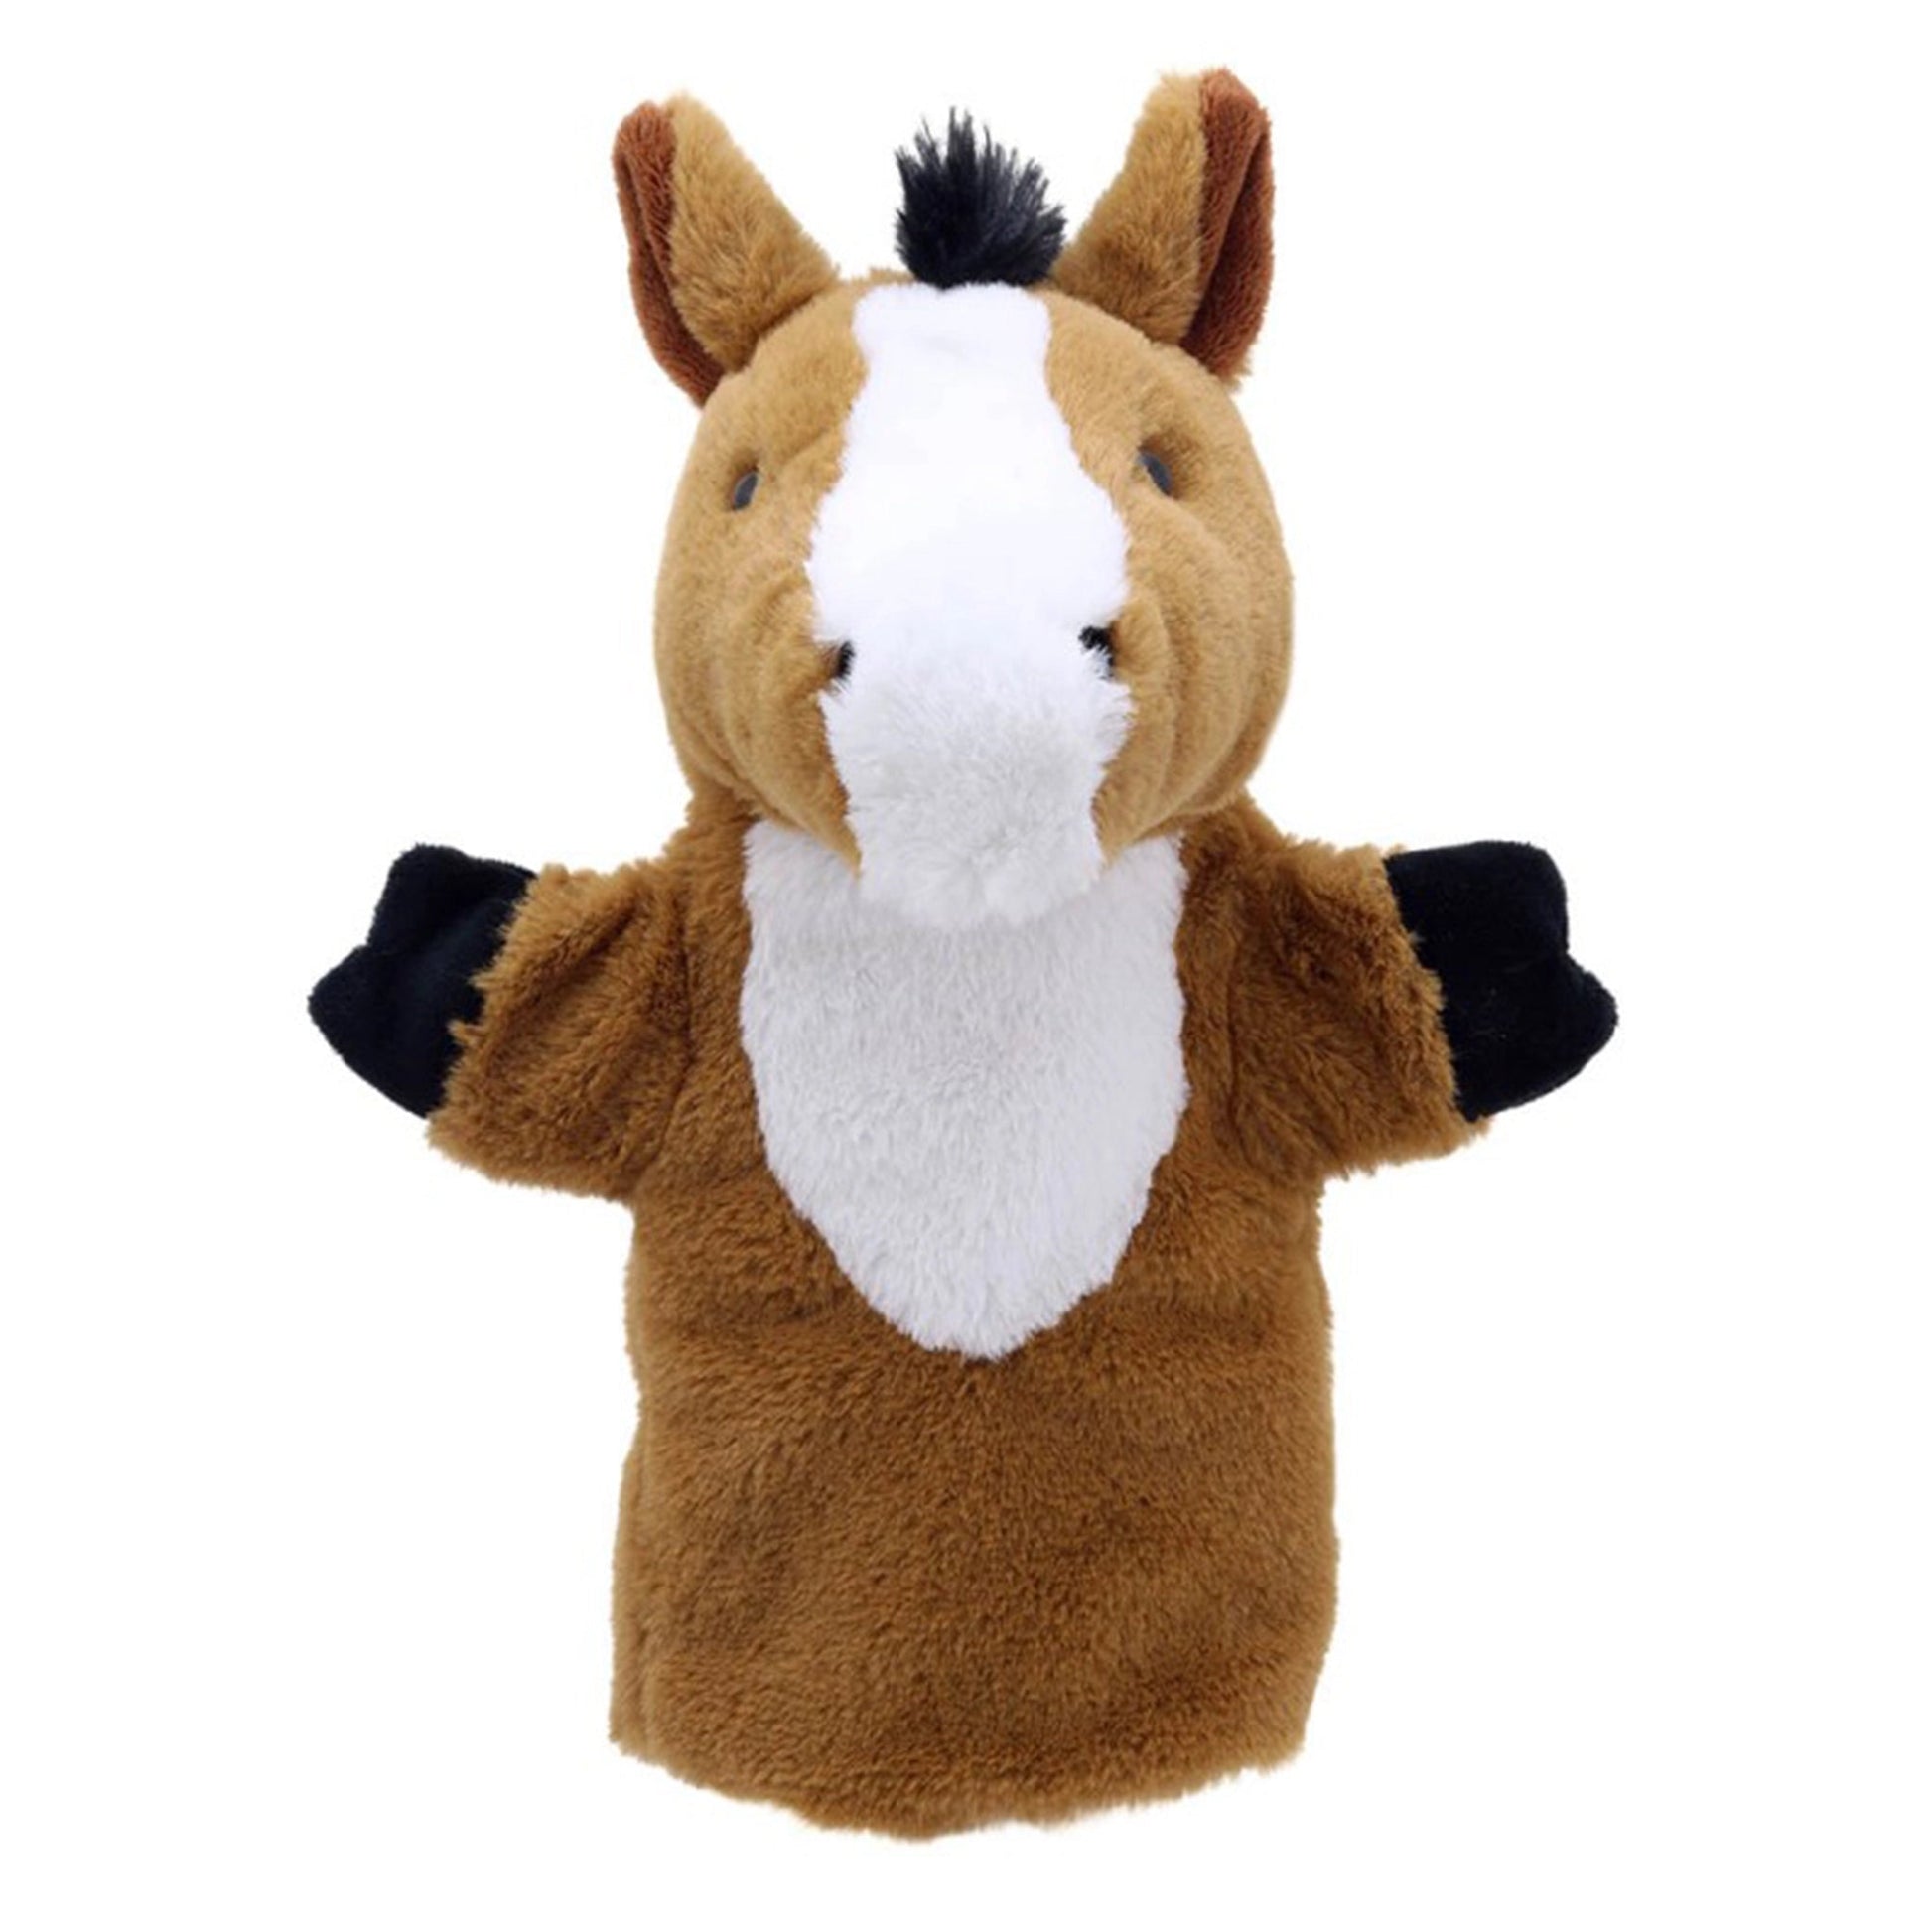 Horse Puppet Buddies Hand Puppet - The Puppet Company - The Forgotten Toy Shop